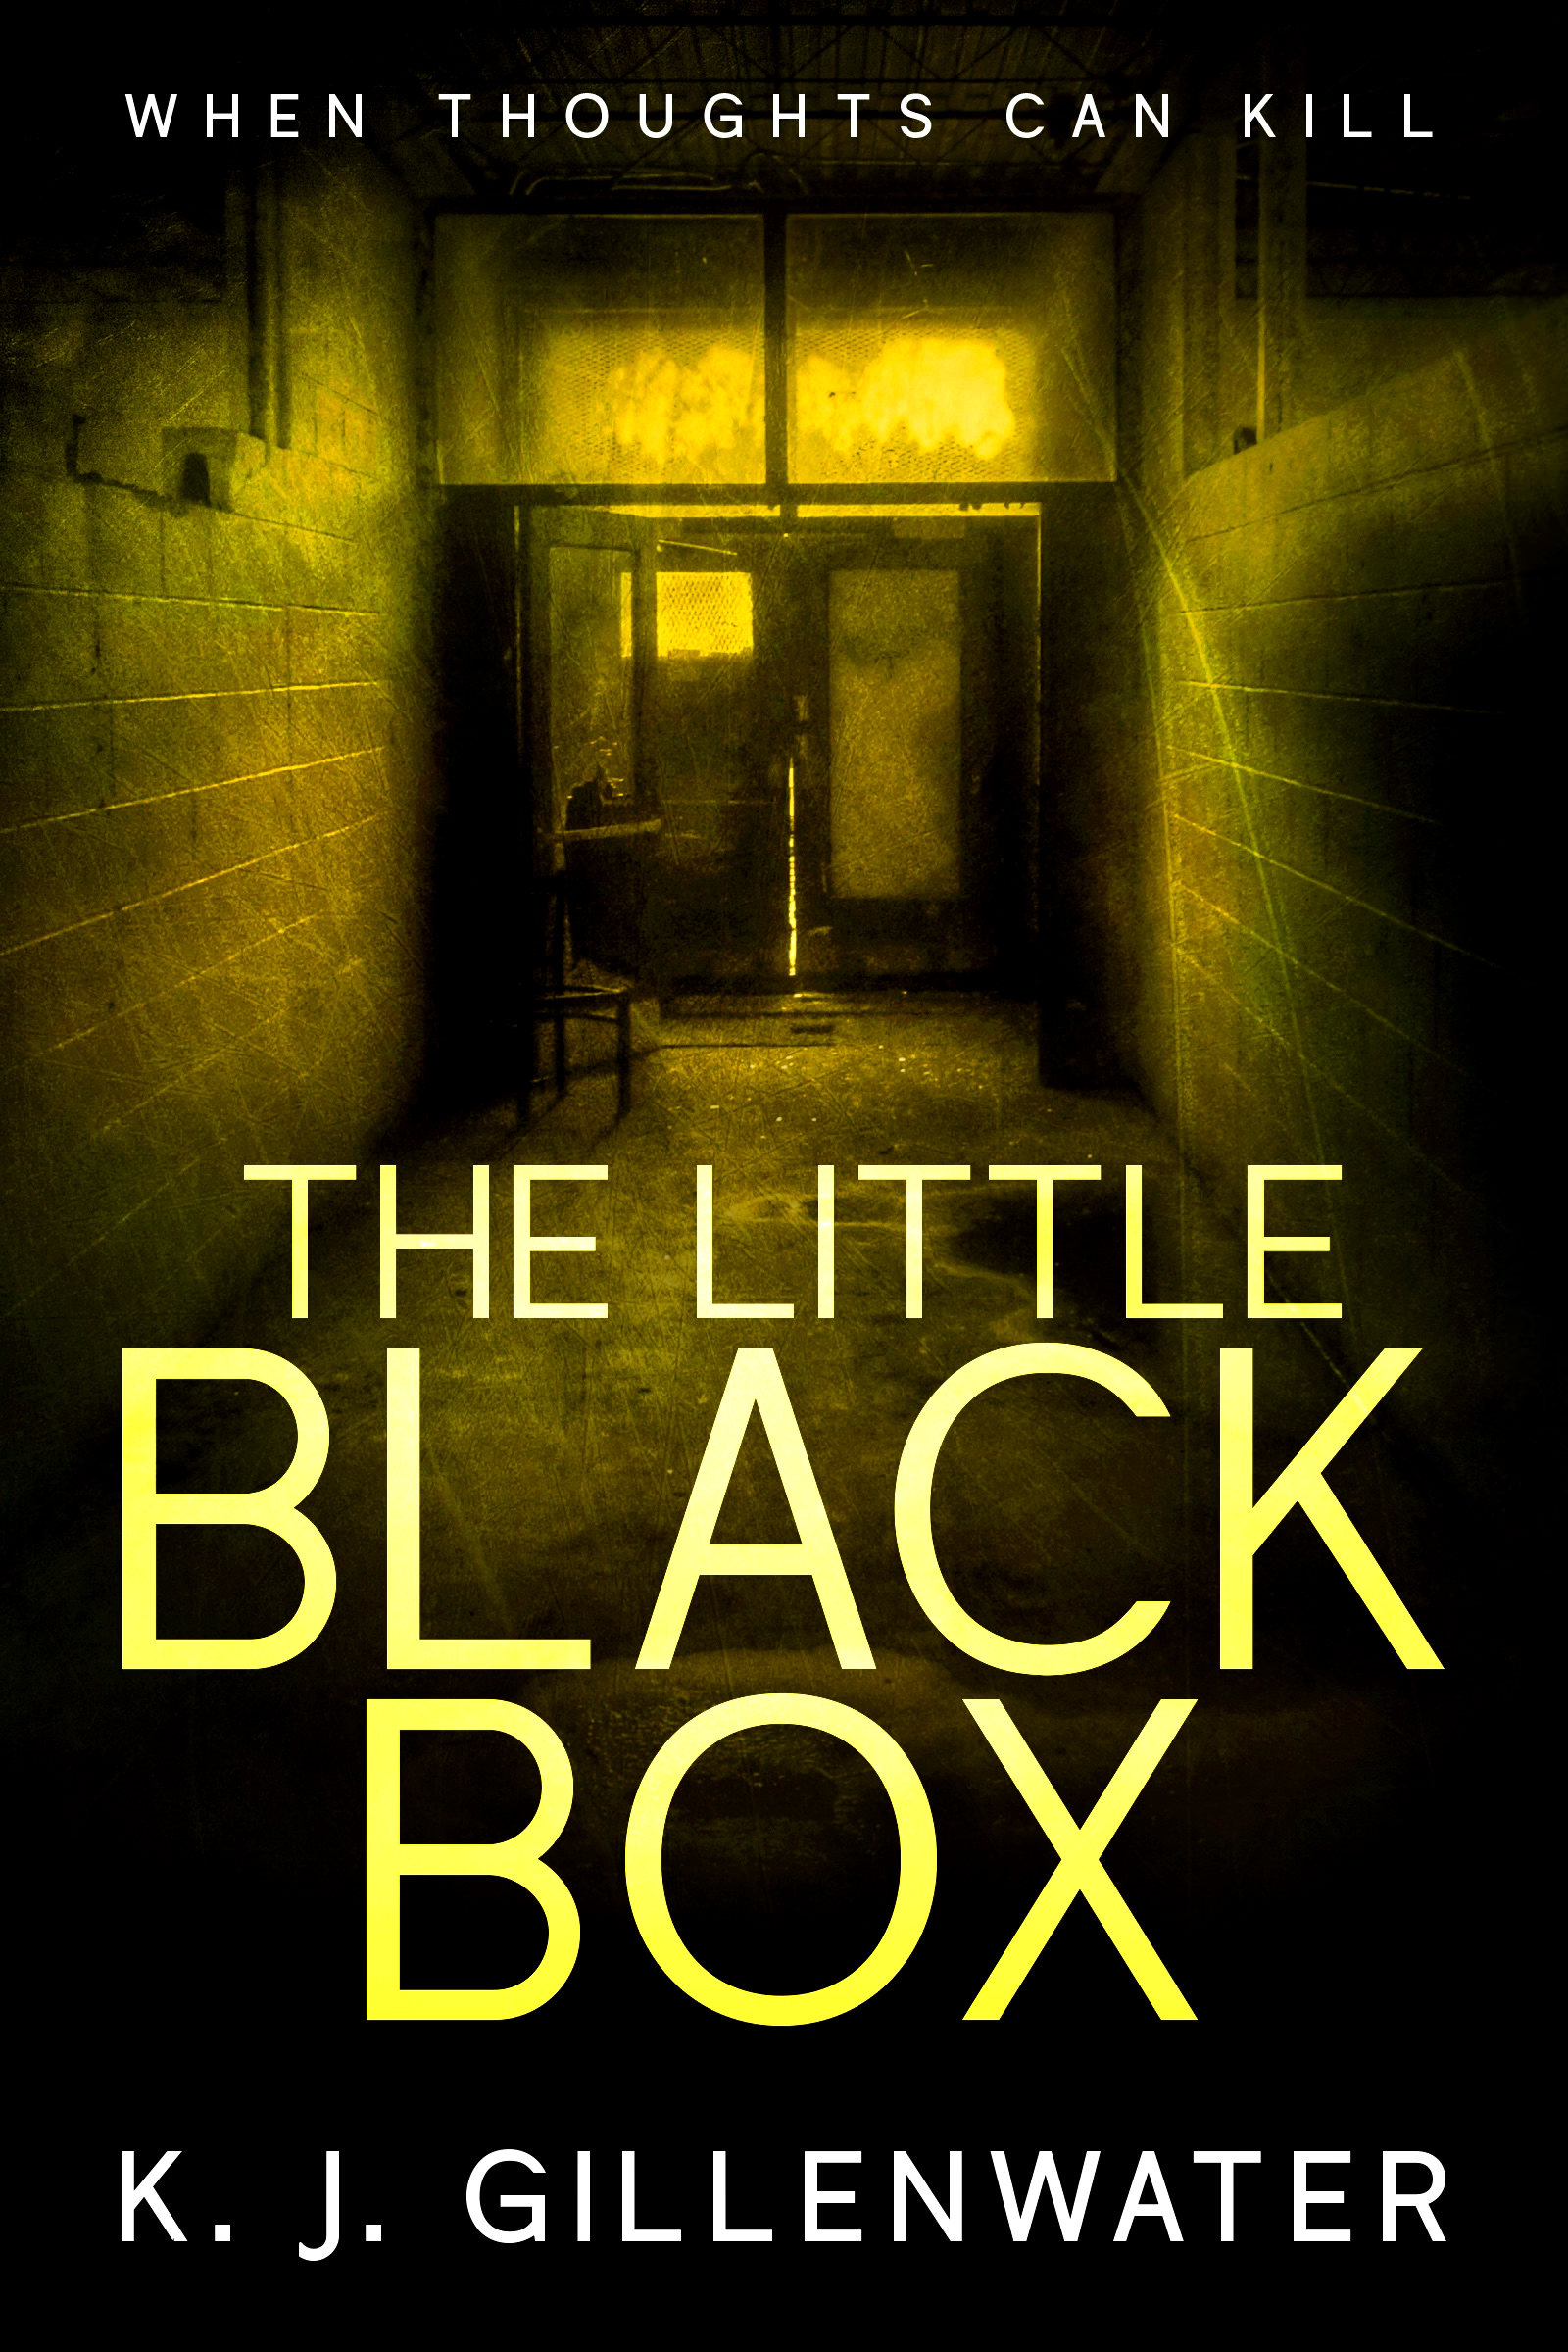 A picture of the cover of the book, the little black box.